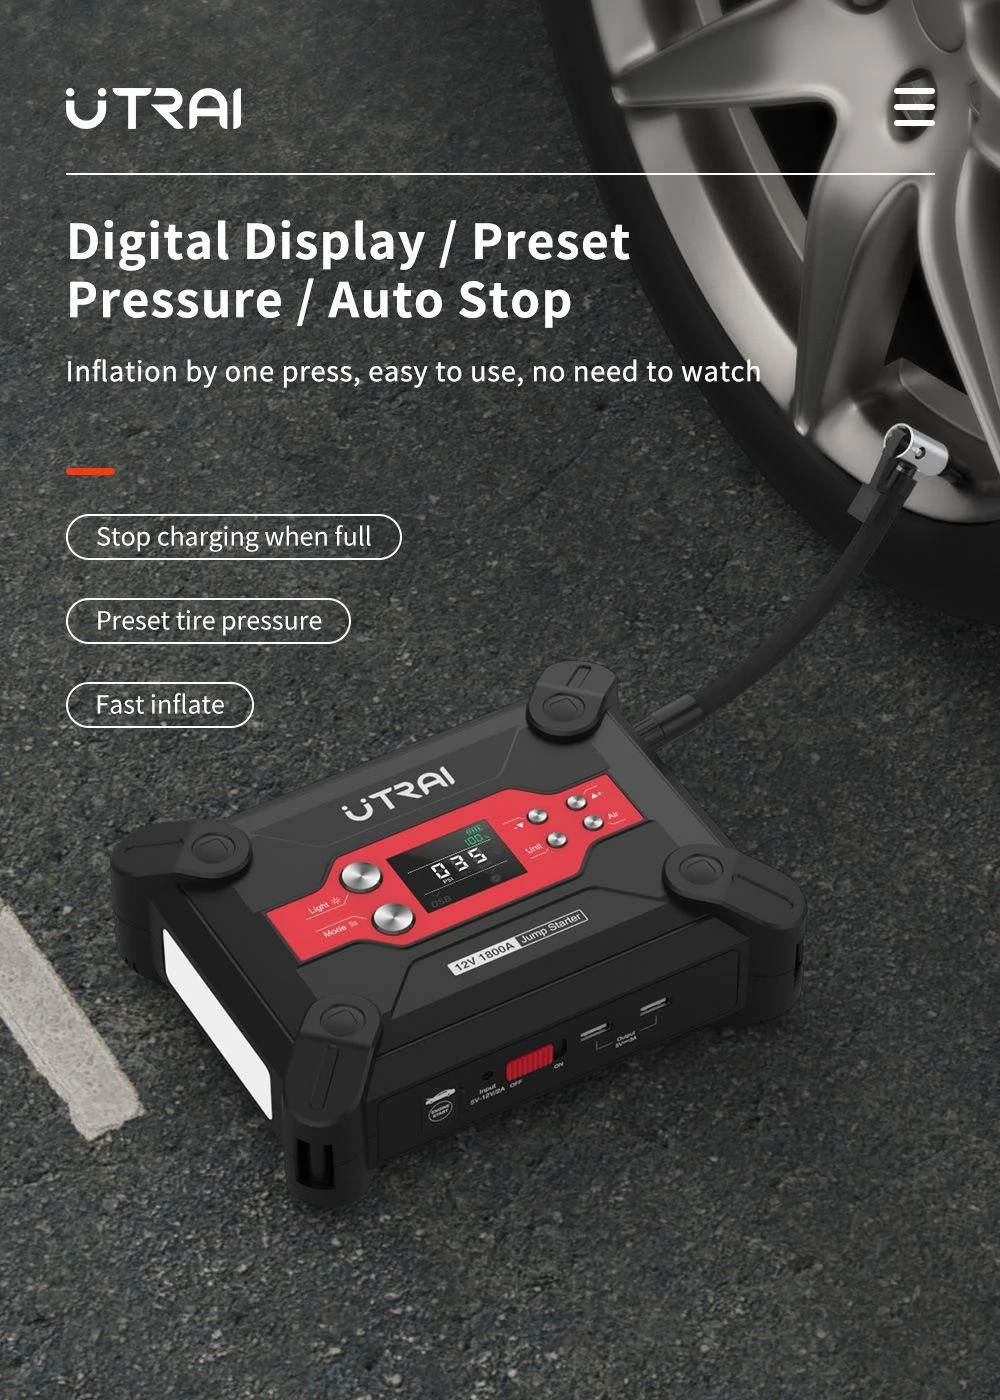 UTRAI Jstar 6 24000mAh 1800A 4-in-1 Car Jump Starter With 120 PSI Air Compressor, Start Up To 7.0 L GAS Or 6.0 L DIESEL Engine